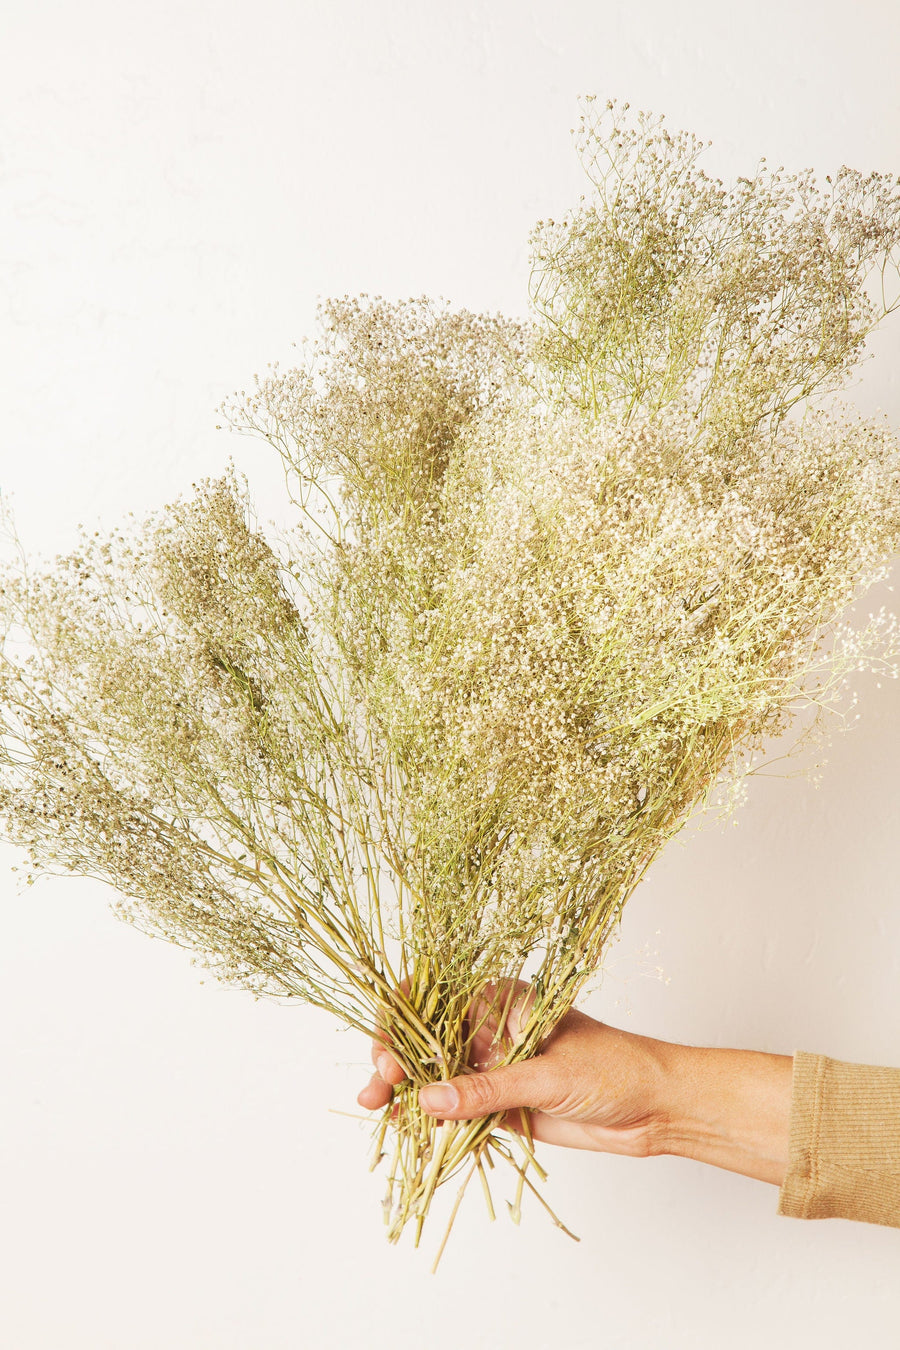 Idlewild Floral Co. Green Baby's Breath